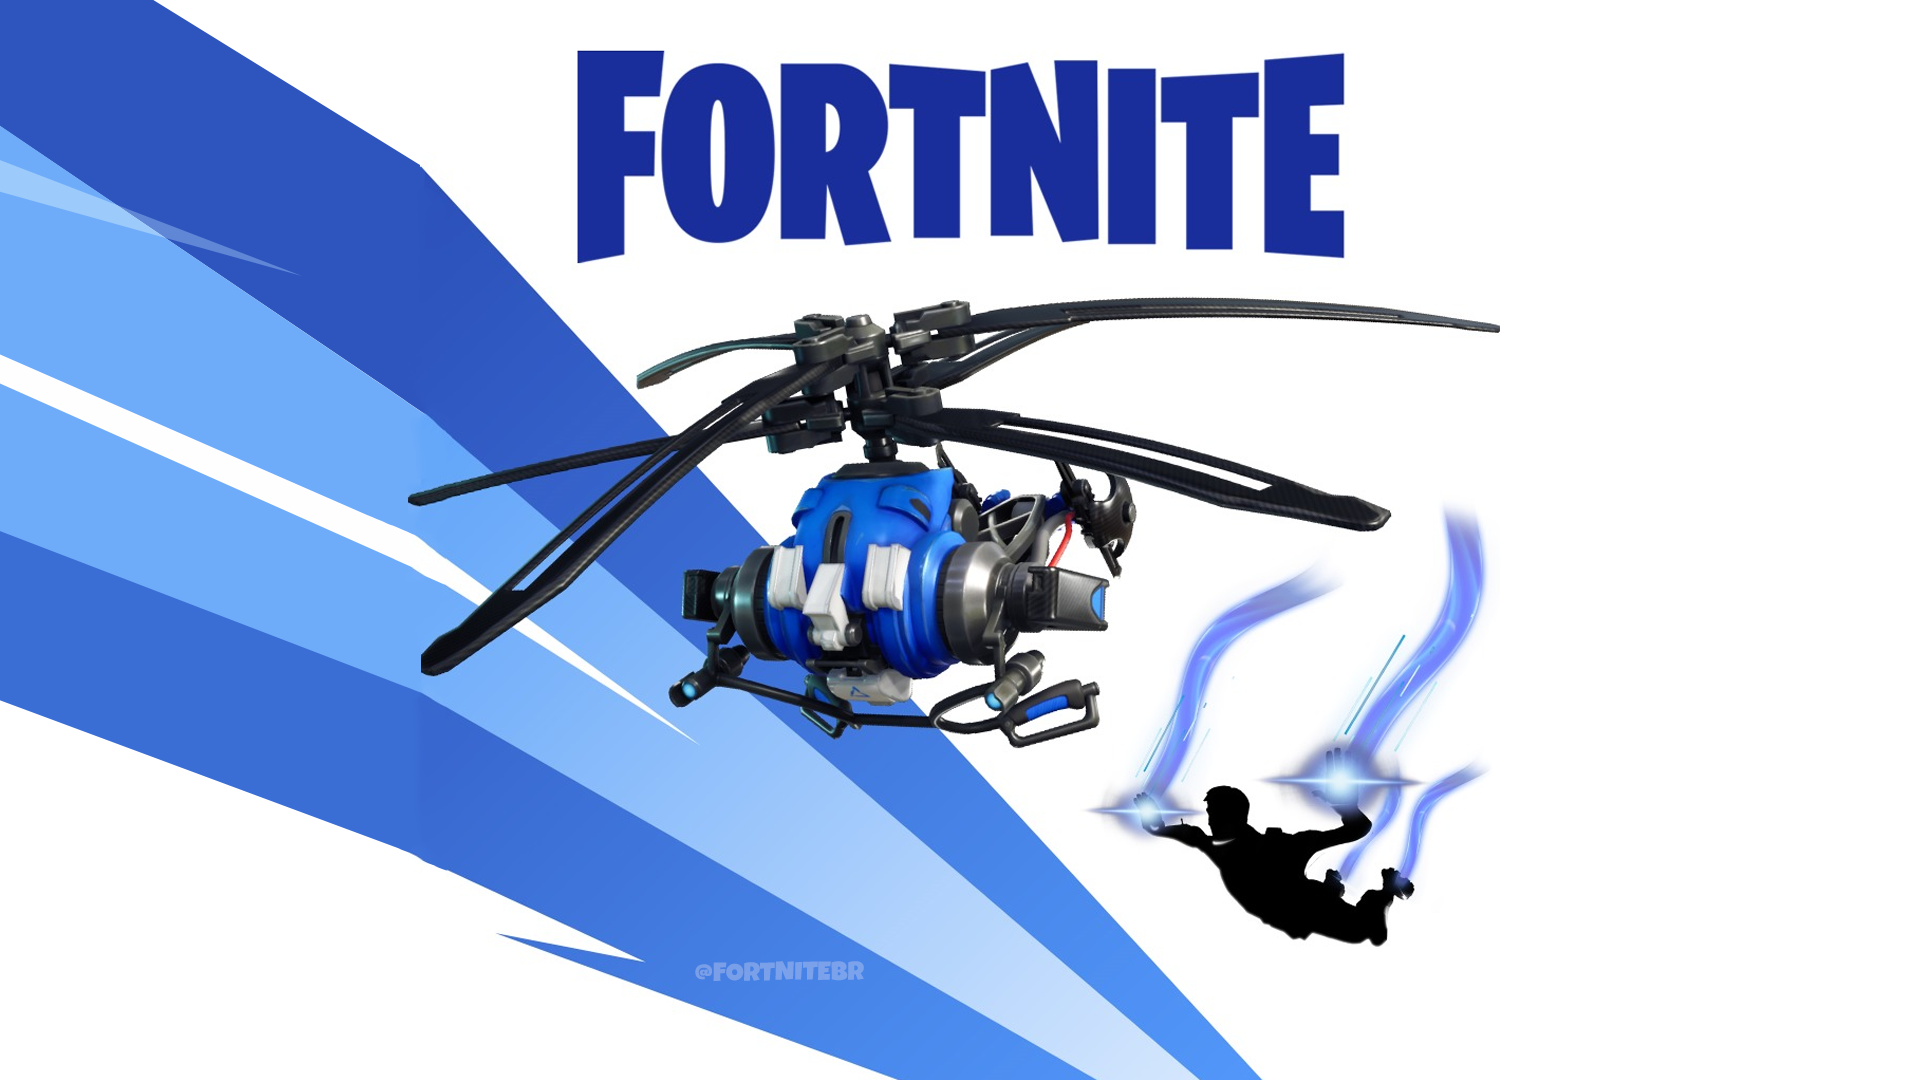 New Fortnite Playstation Plus Celebration Pack Now Available Fortnite News